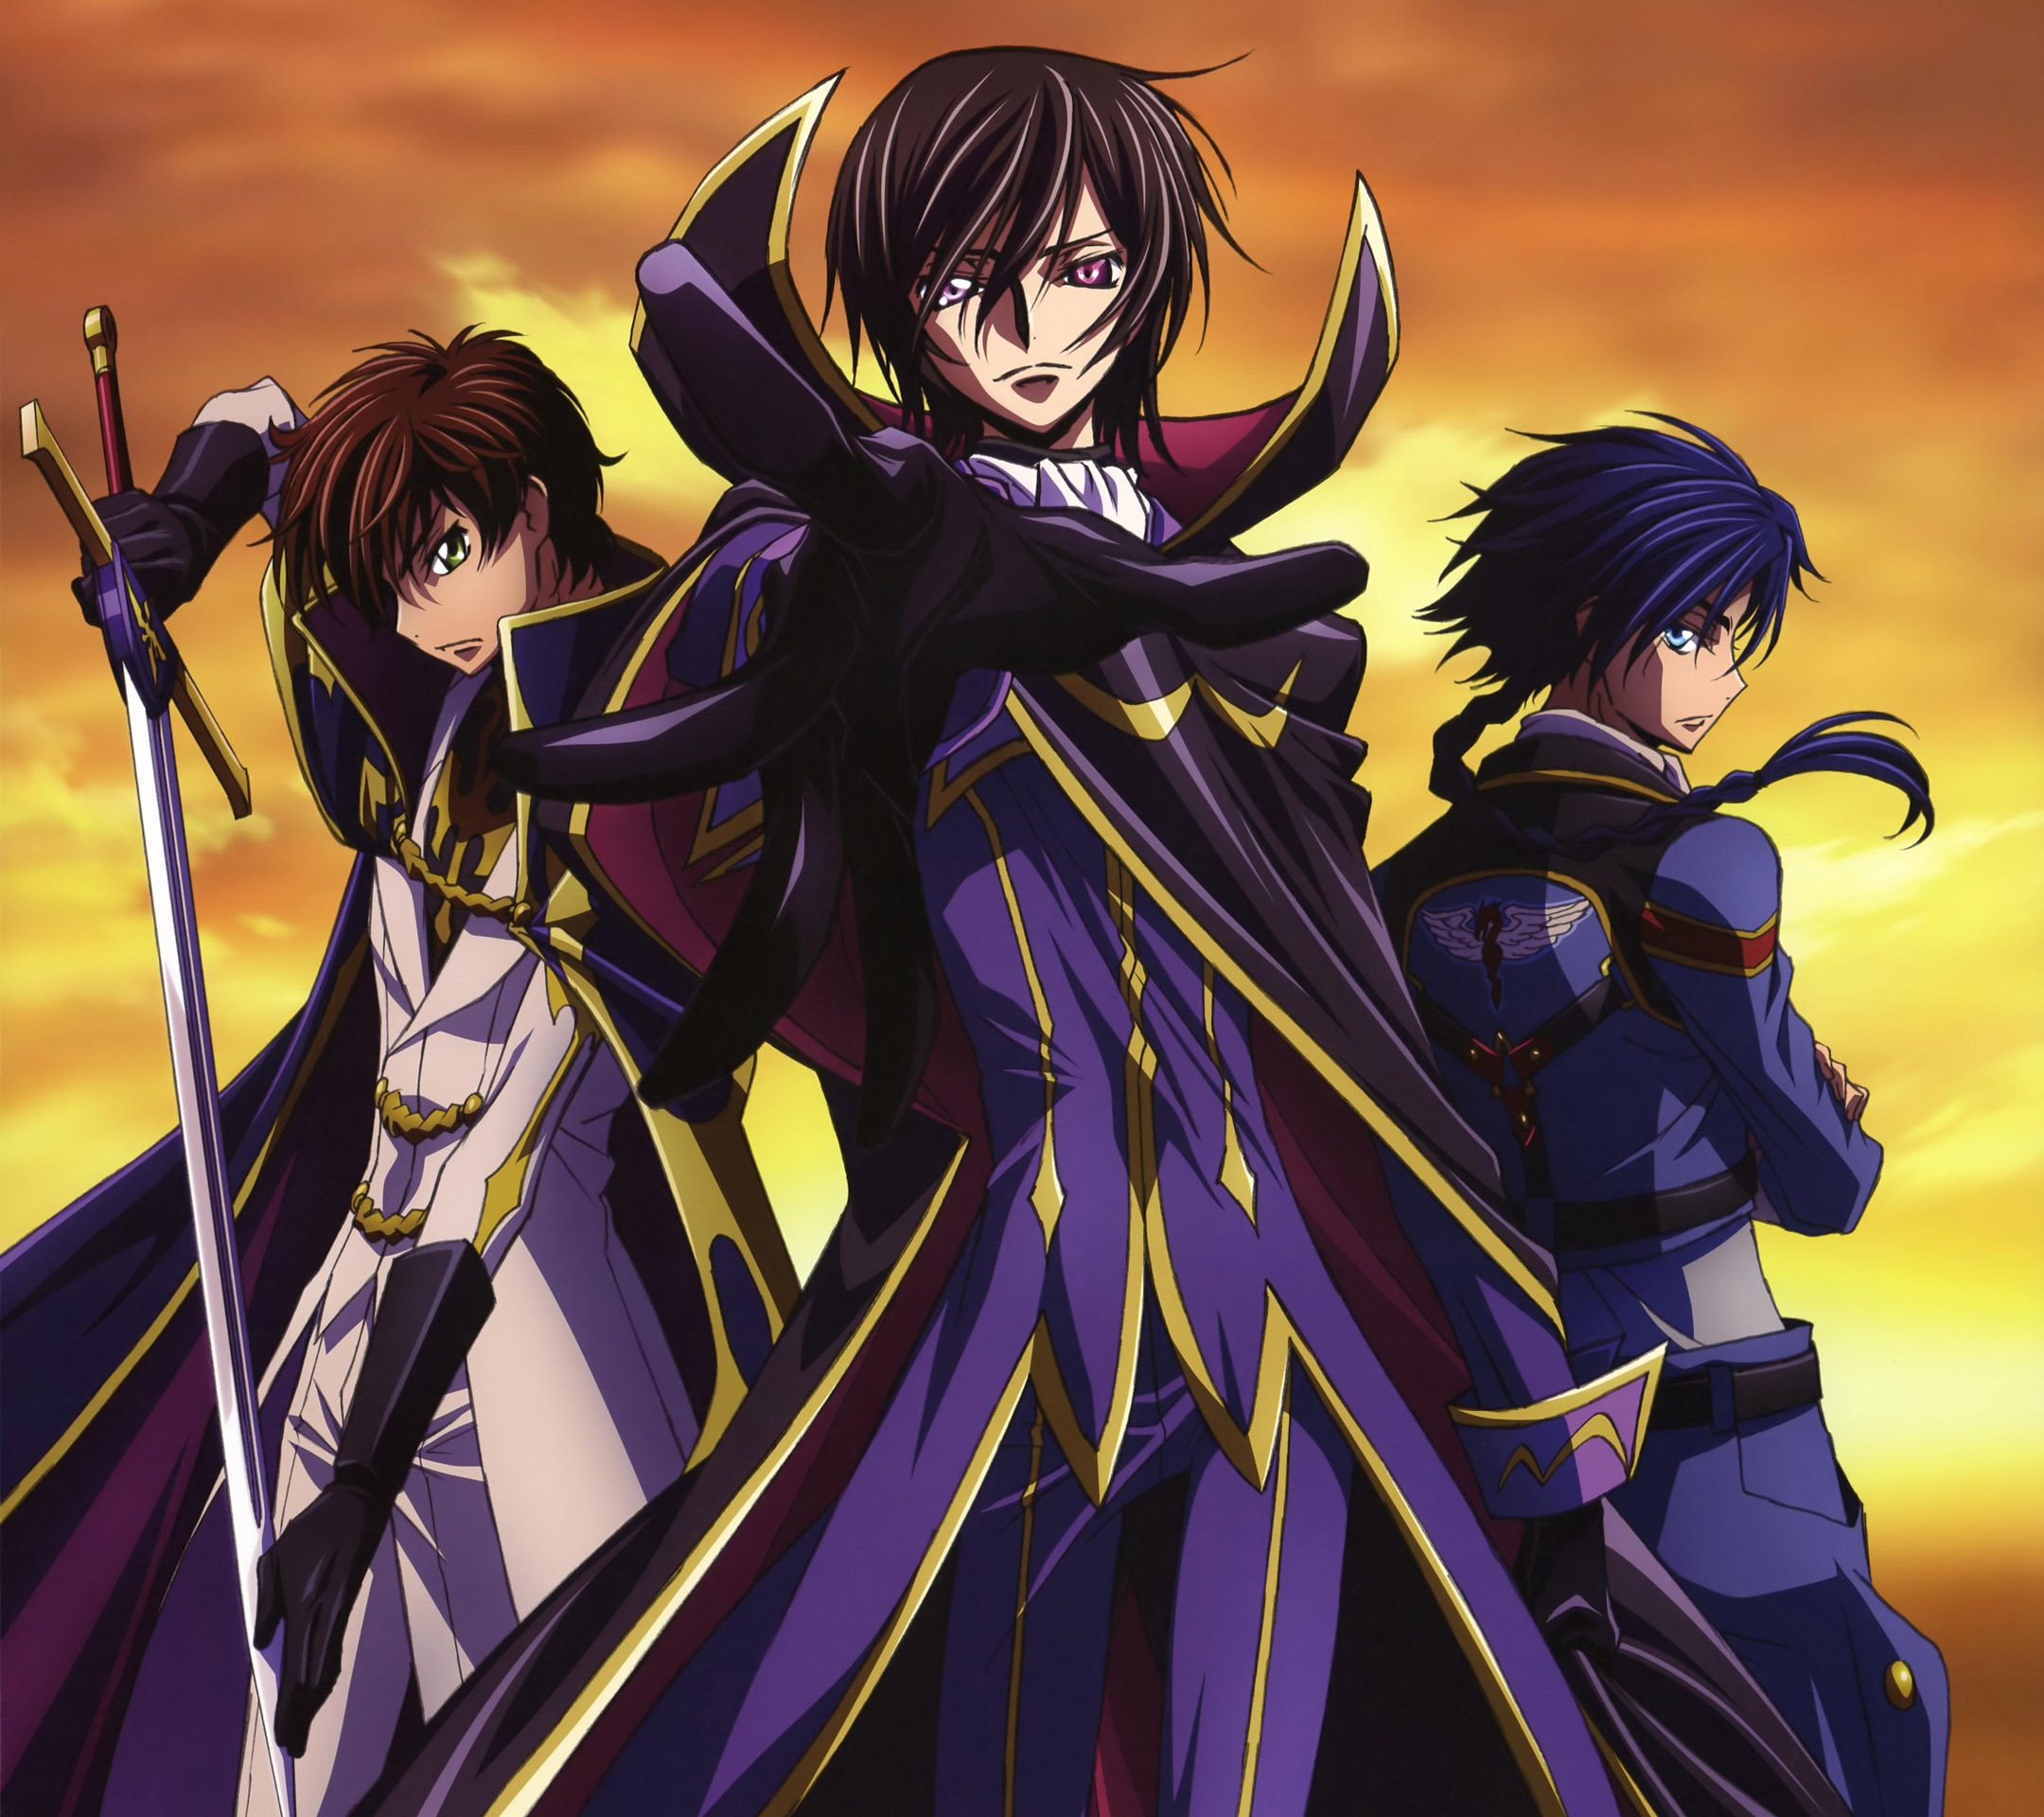 File Name 997365 High Res Code Geass Wallpapers 997365 Images